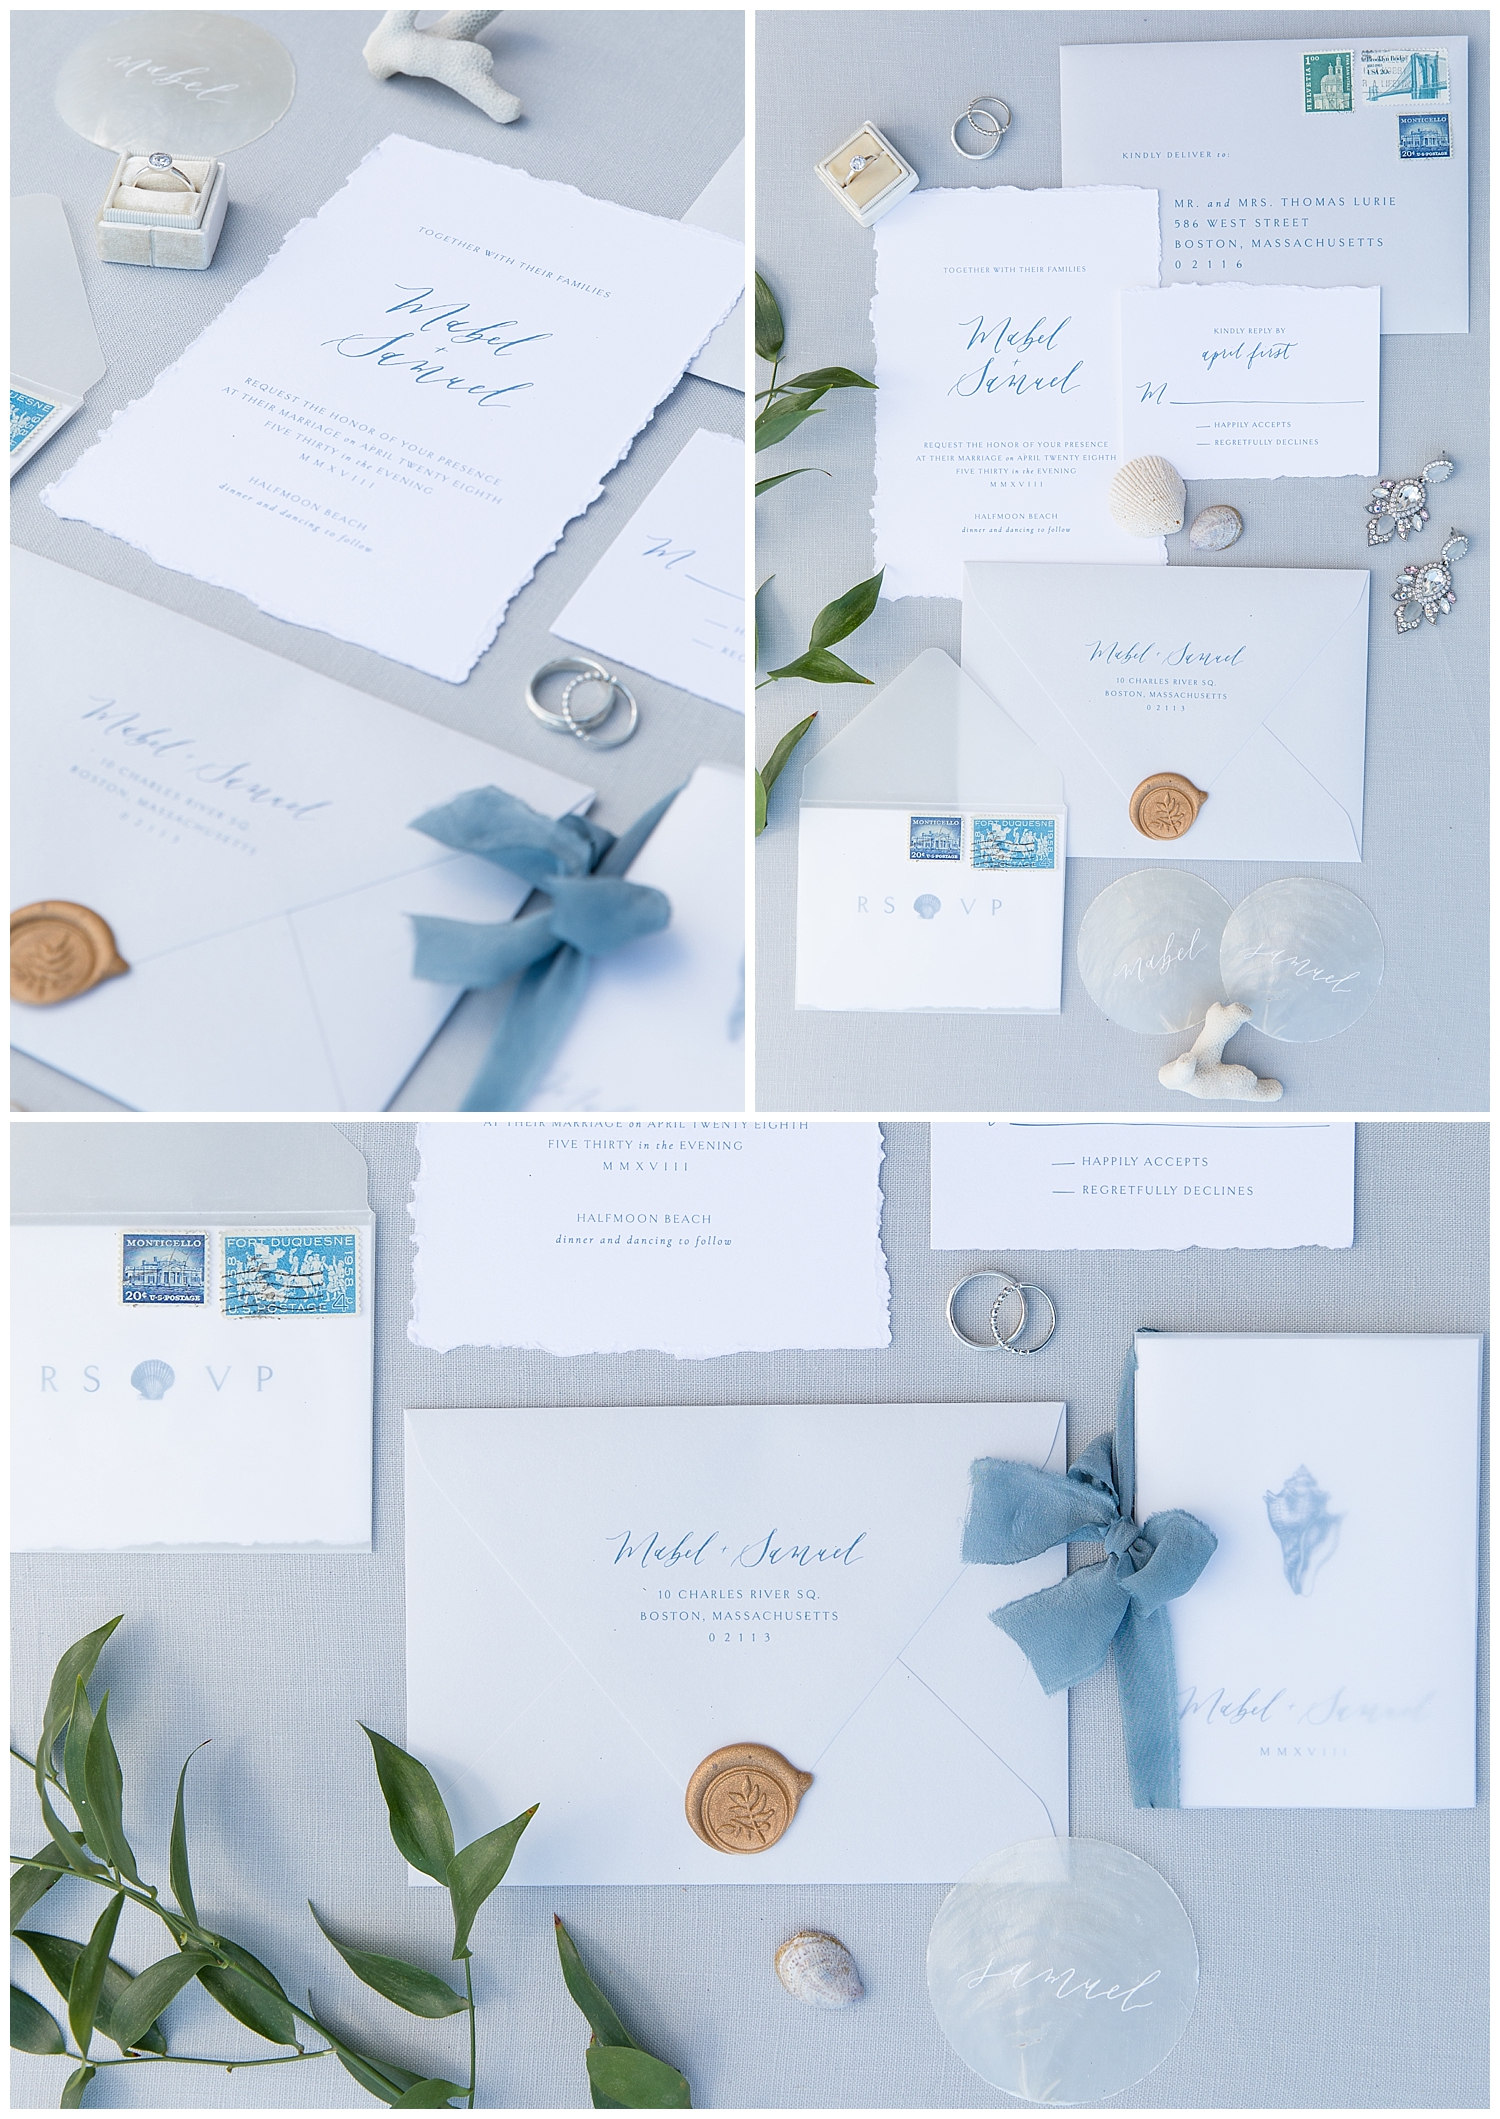 Invitation suite by Quinn Luu for Intimate Coastal, North Shore Elopement in Gloucester, MA. Photography, by Halie Olszowy.